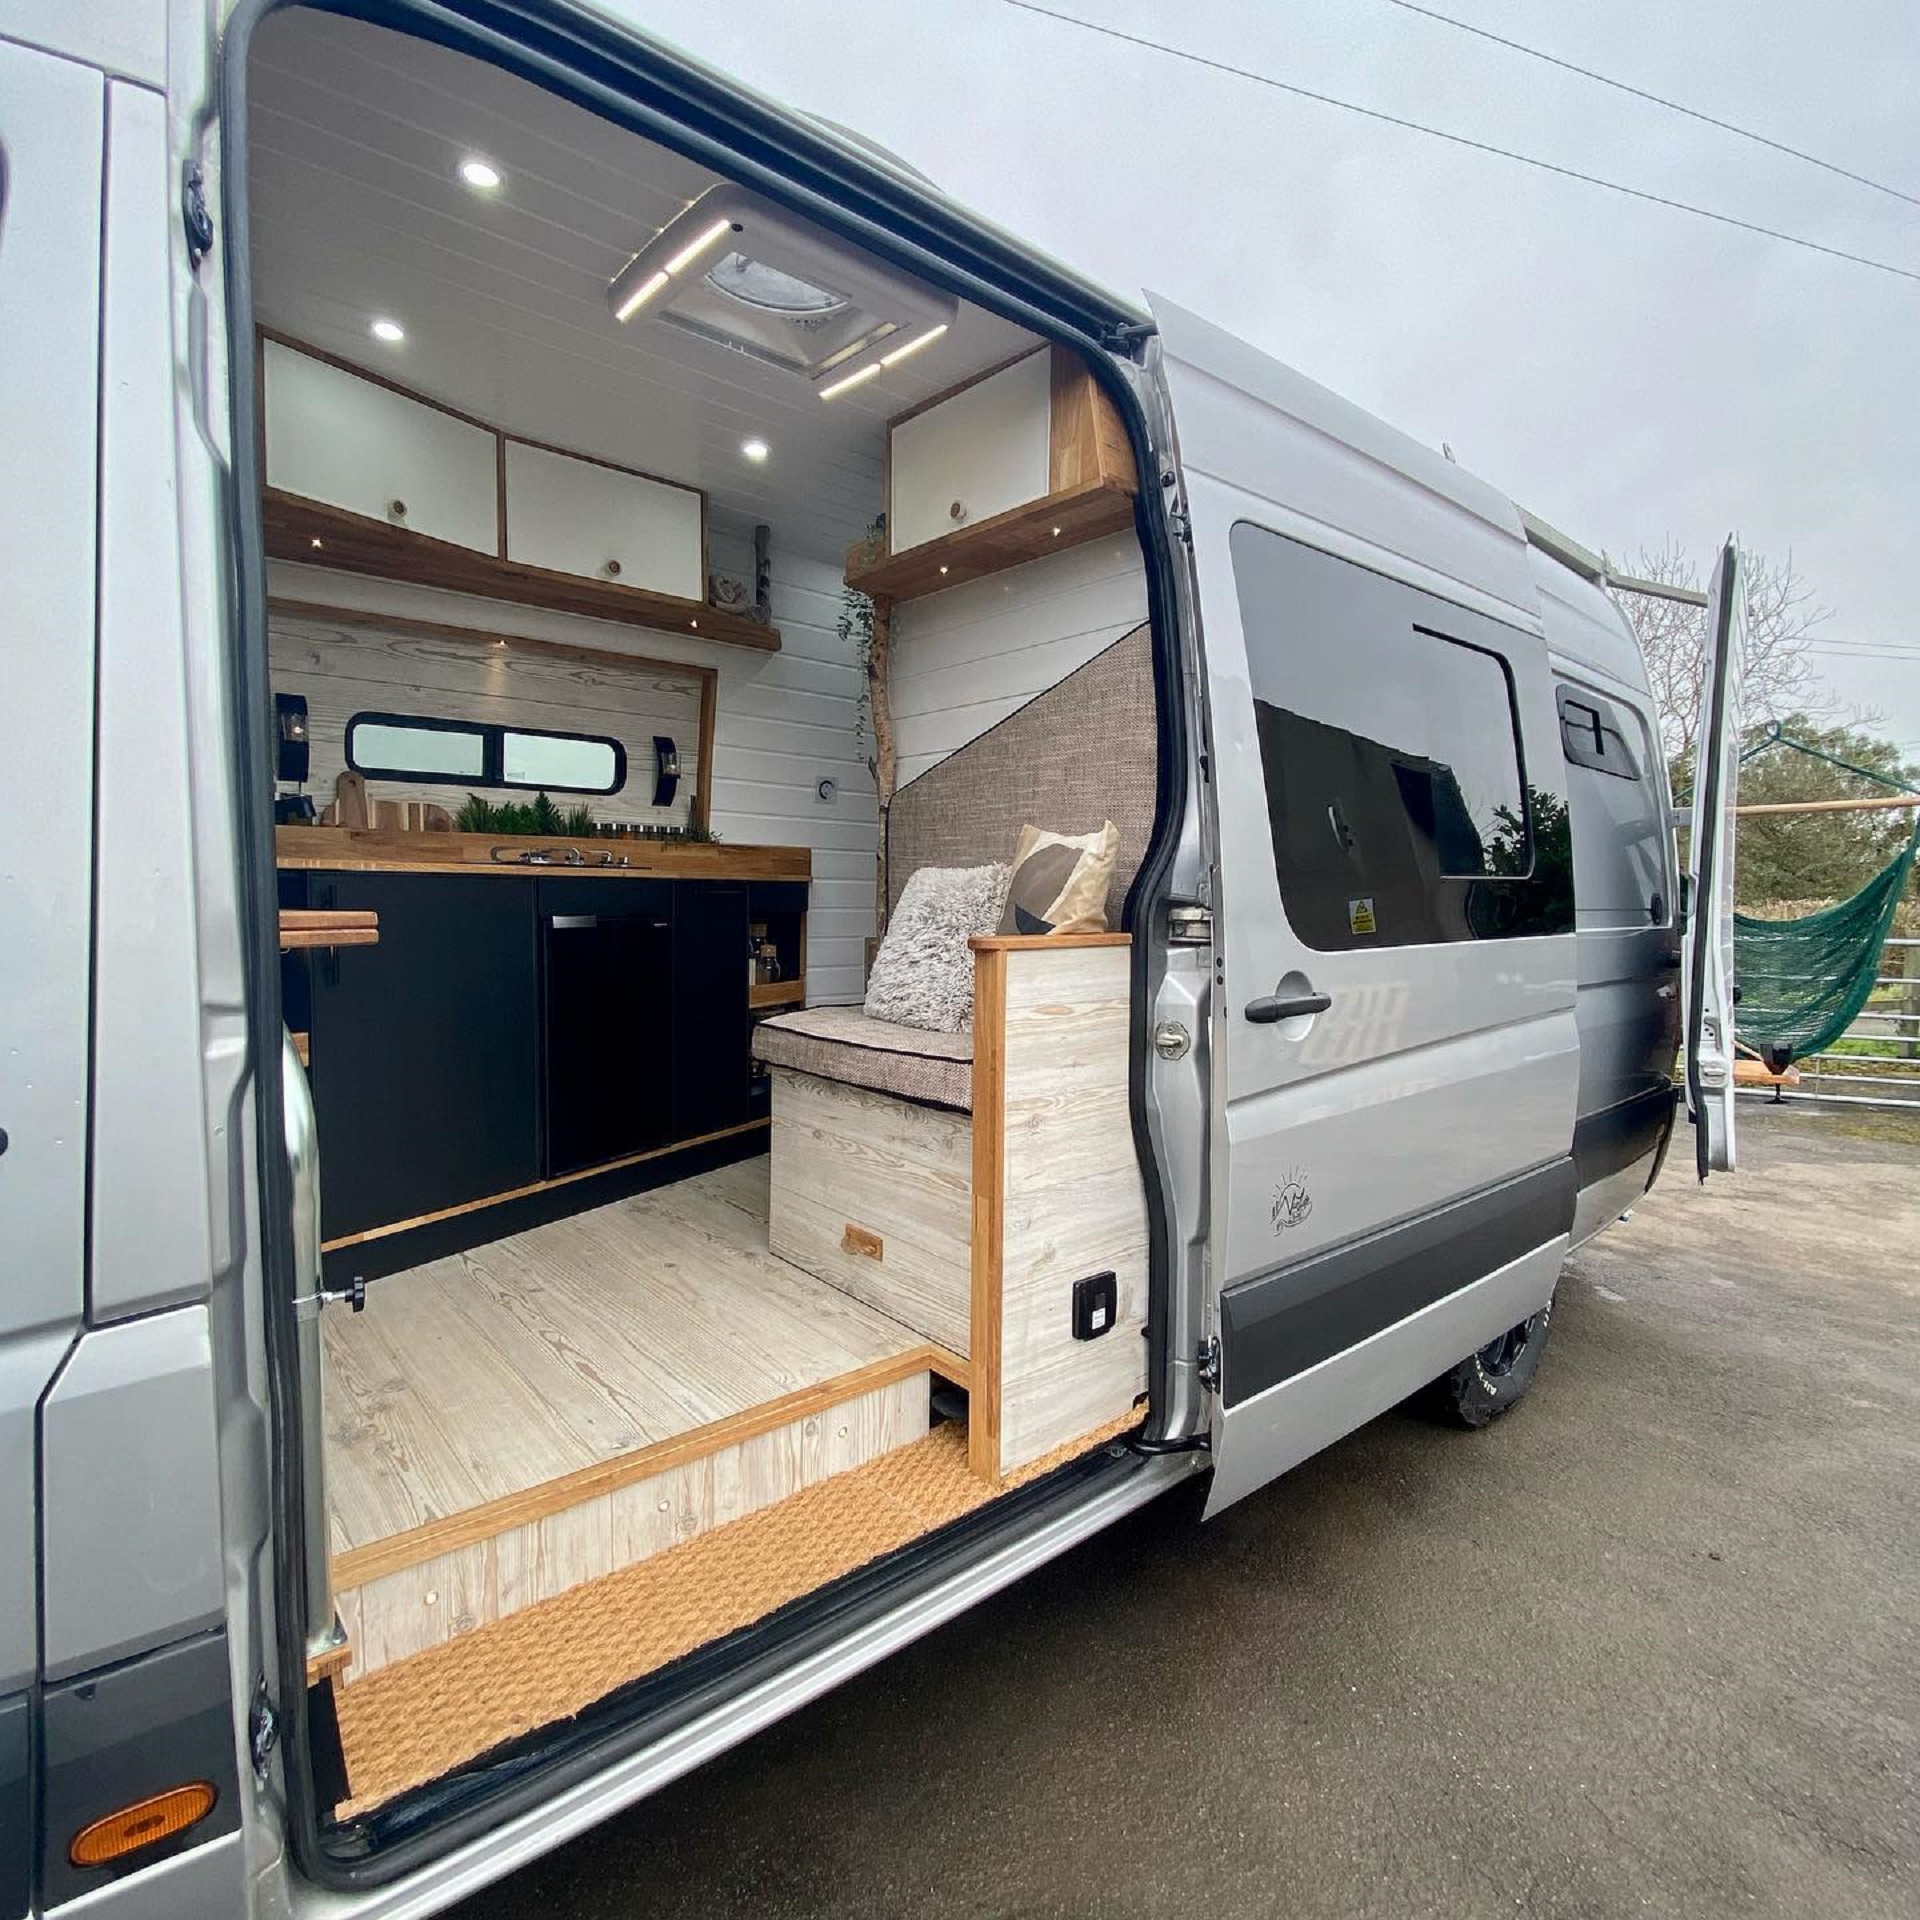 VW Crafter-Based Campervan Is a Gorgeous, Off-Grid Resort Designed to Heal  Your Soul - autoevolution